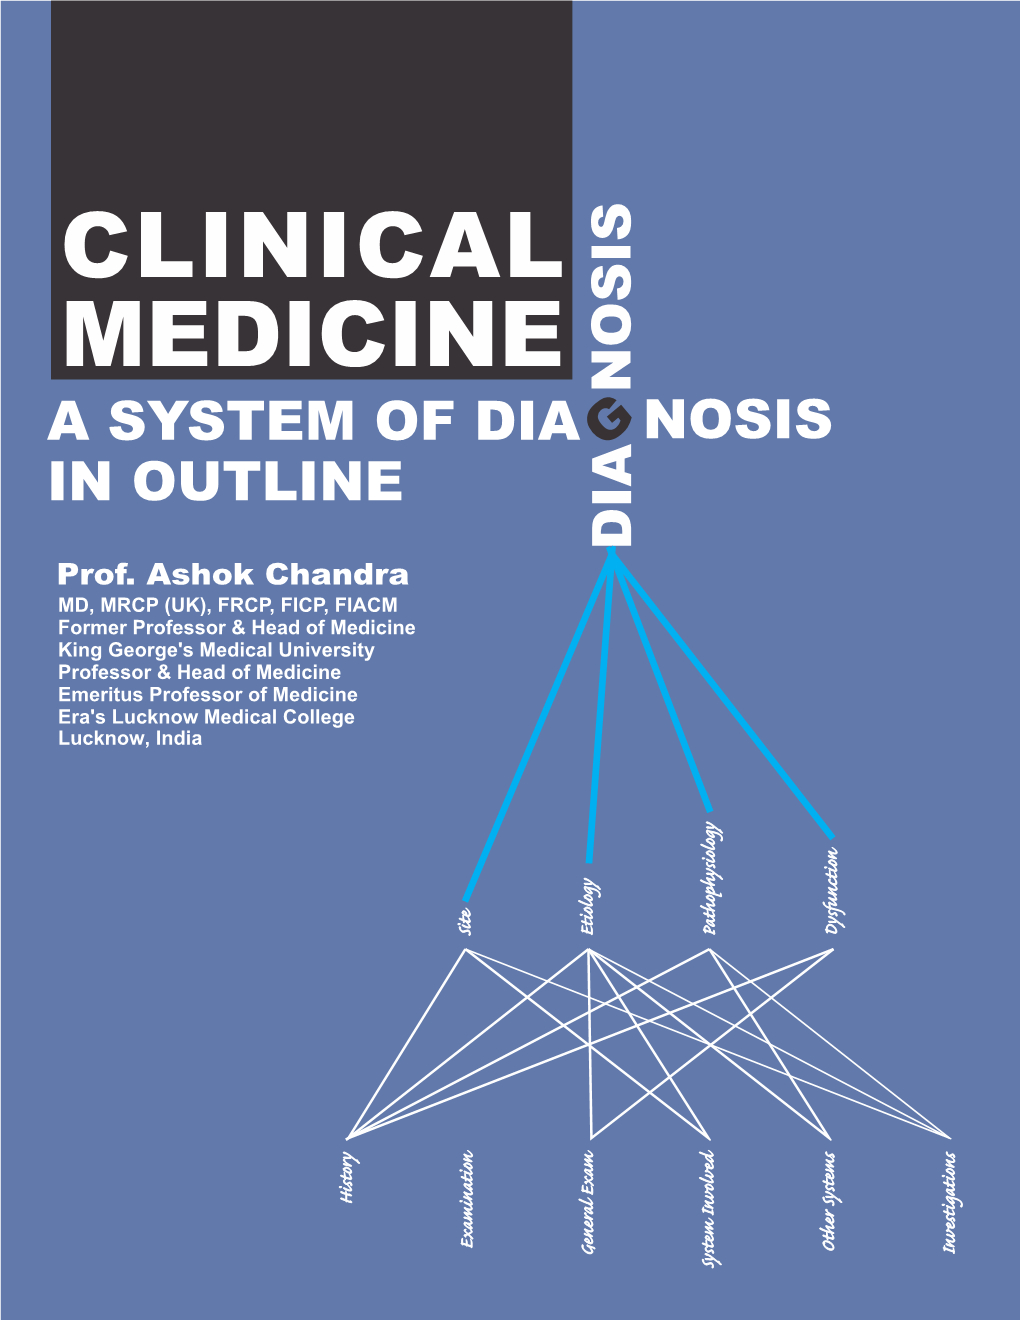 CLINICAL MEDICINE NOSIS a SYSTEM of DIA G NOSIS in OUTLINE DIA Prof